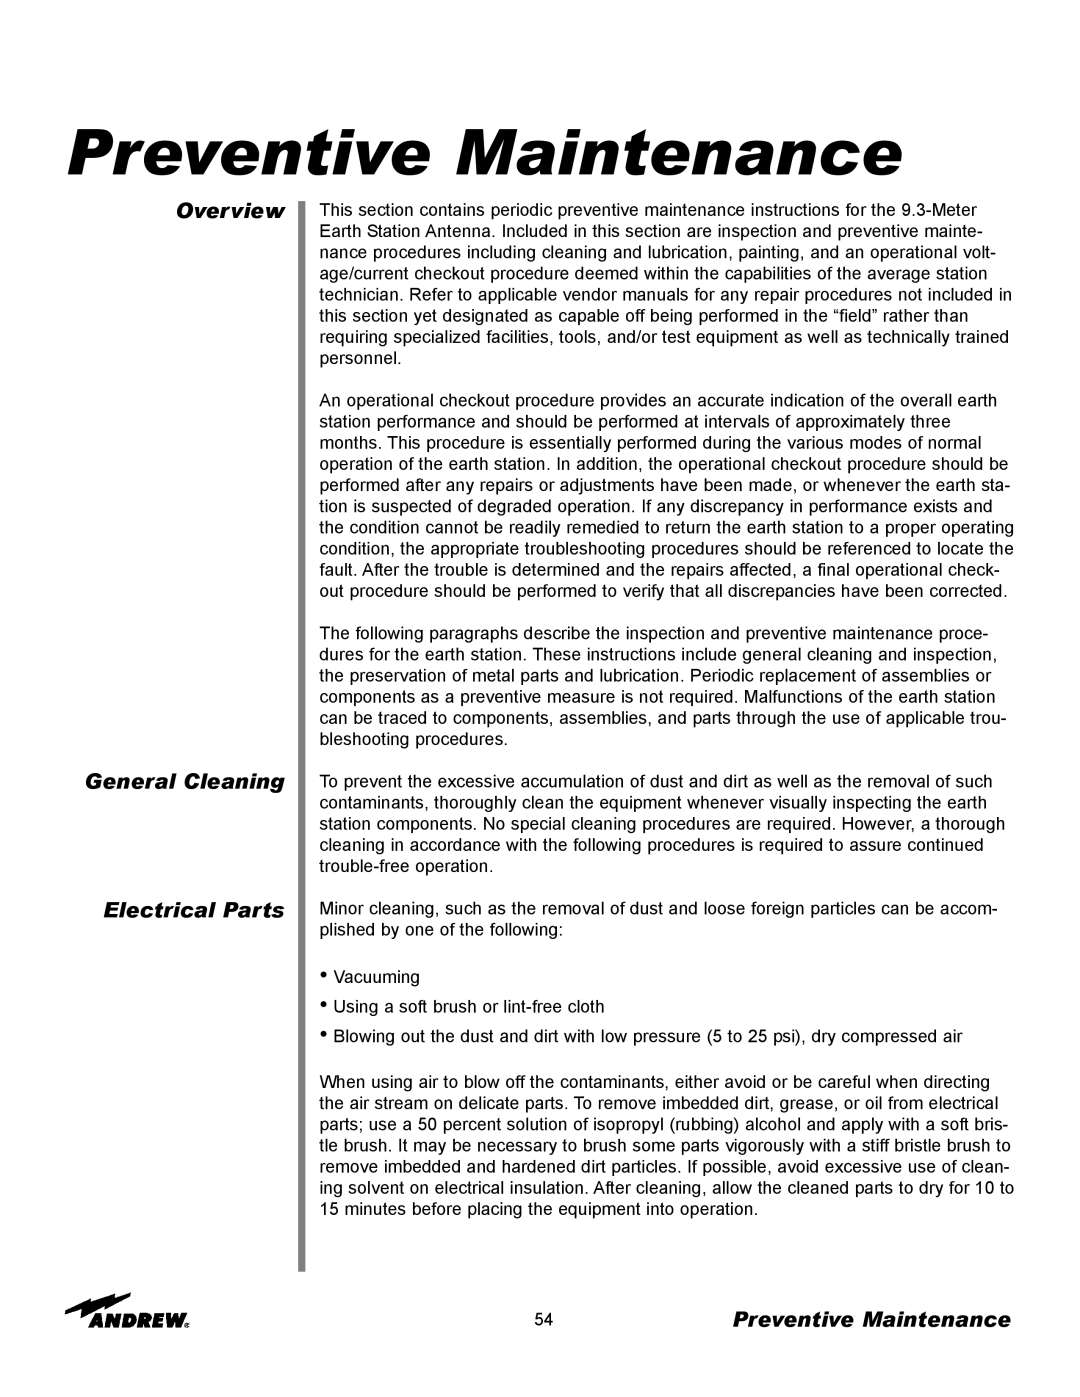 Andrew 9.3-Meter ESA manual Preventive Maintenance, Overview General Cleaning Electrical Parts 